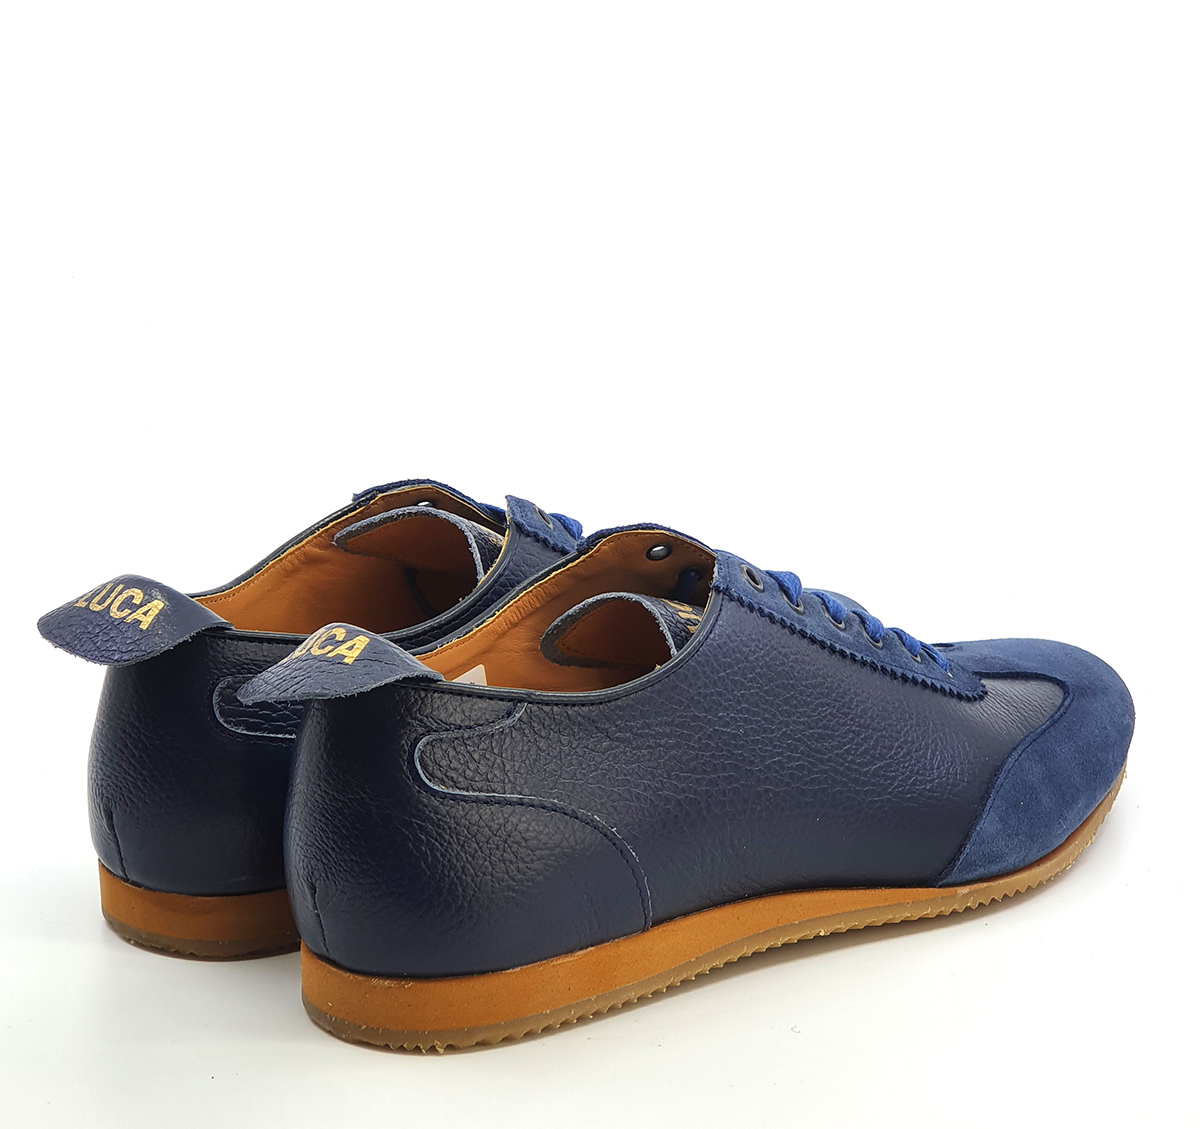 The Luca In Blue Leather & Suede – Old School Trainers – Mod Shoes